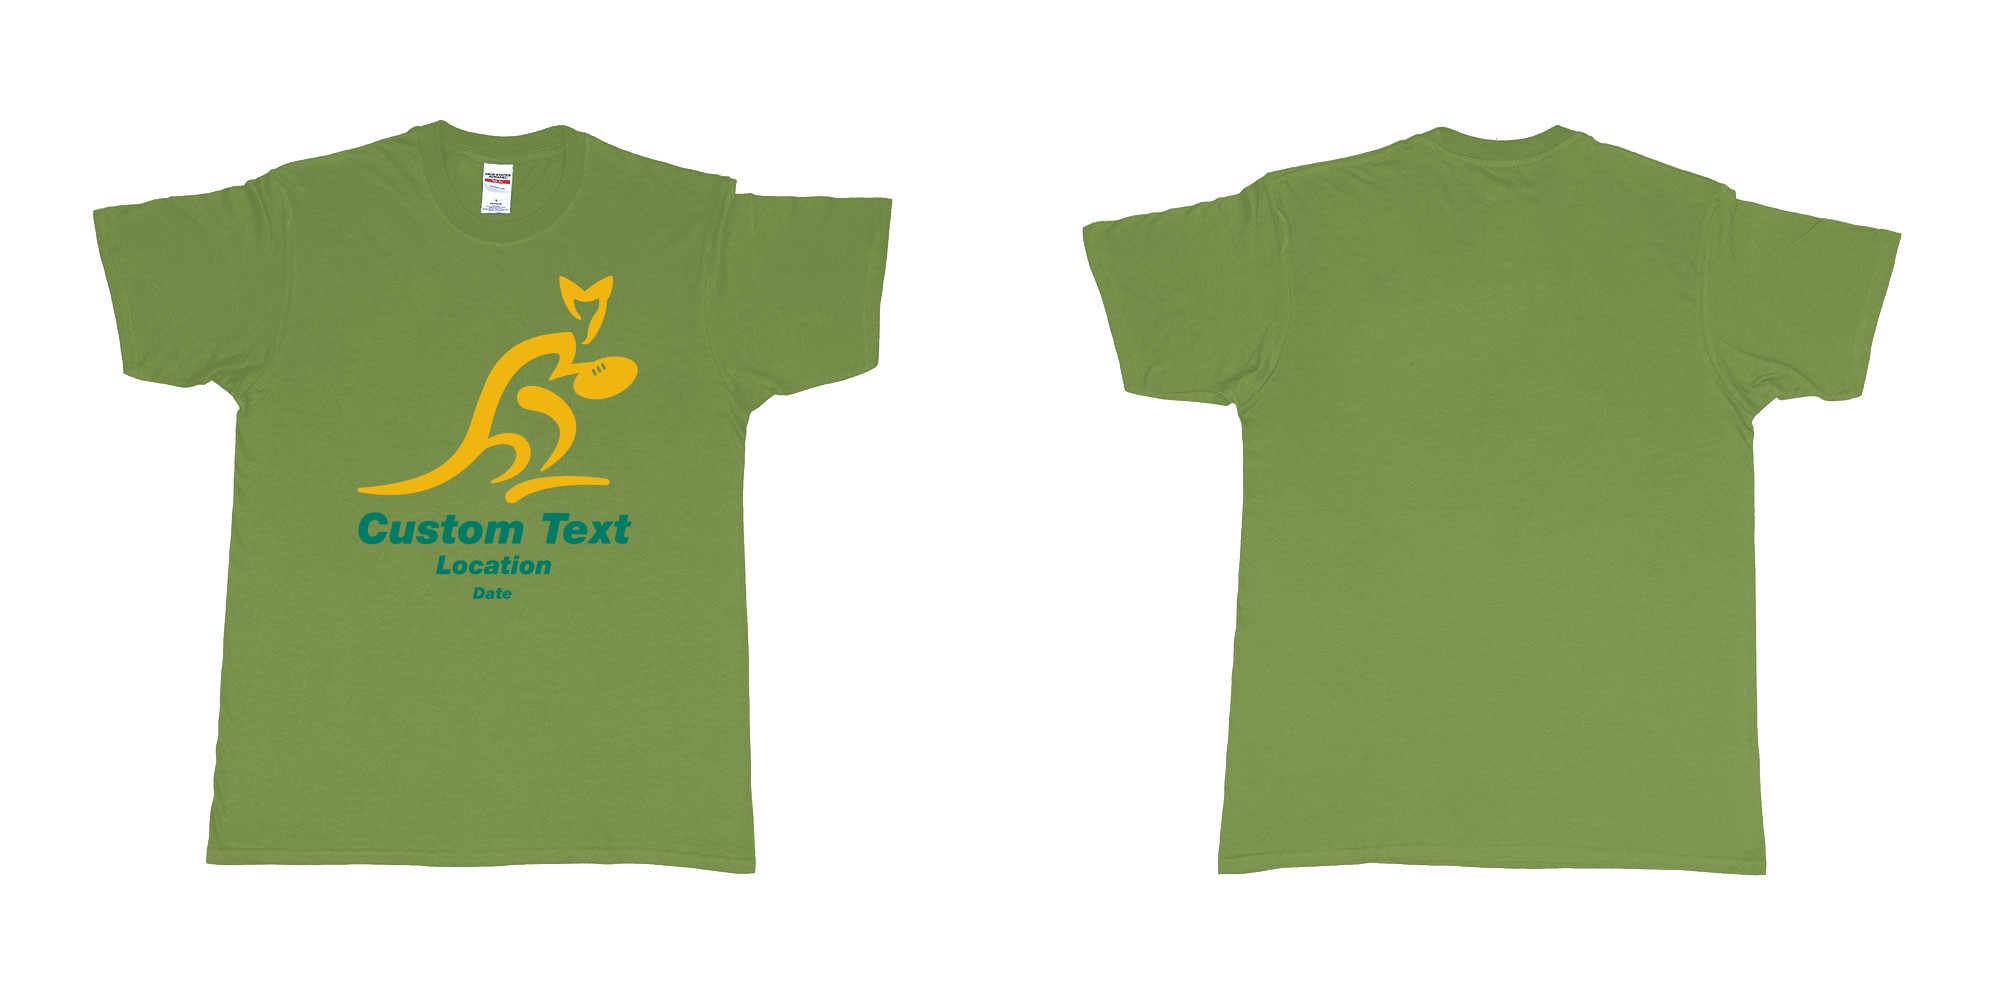 Custom tshirt design australia national rugby union team the wallabies in fabric color military-green choice your own text made in Bali by The Pirate Way